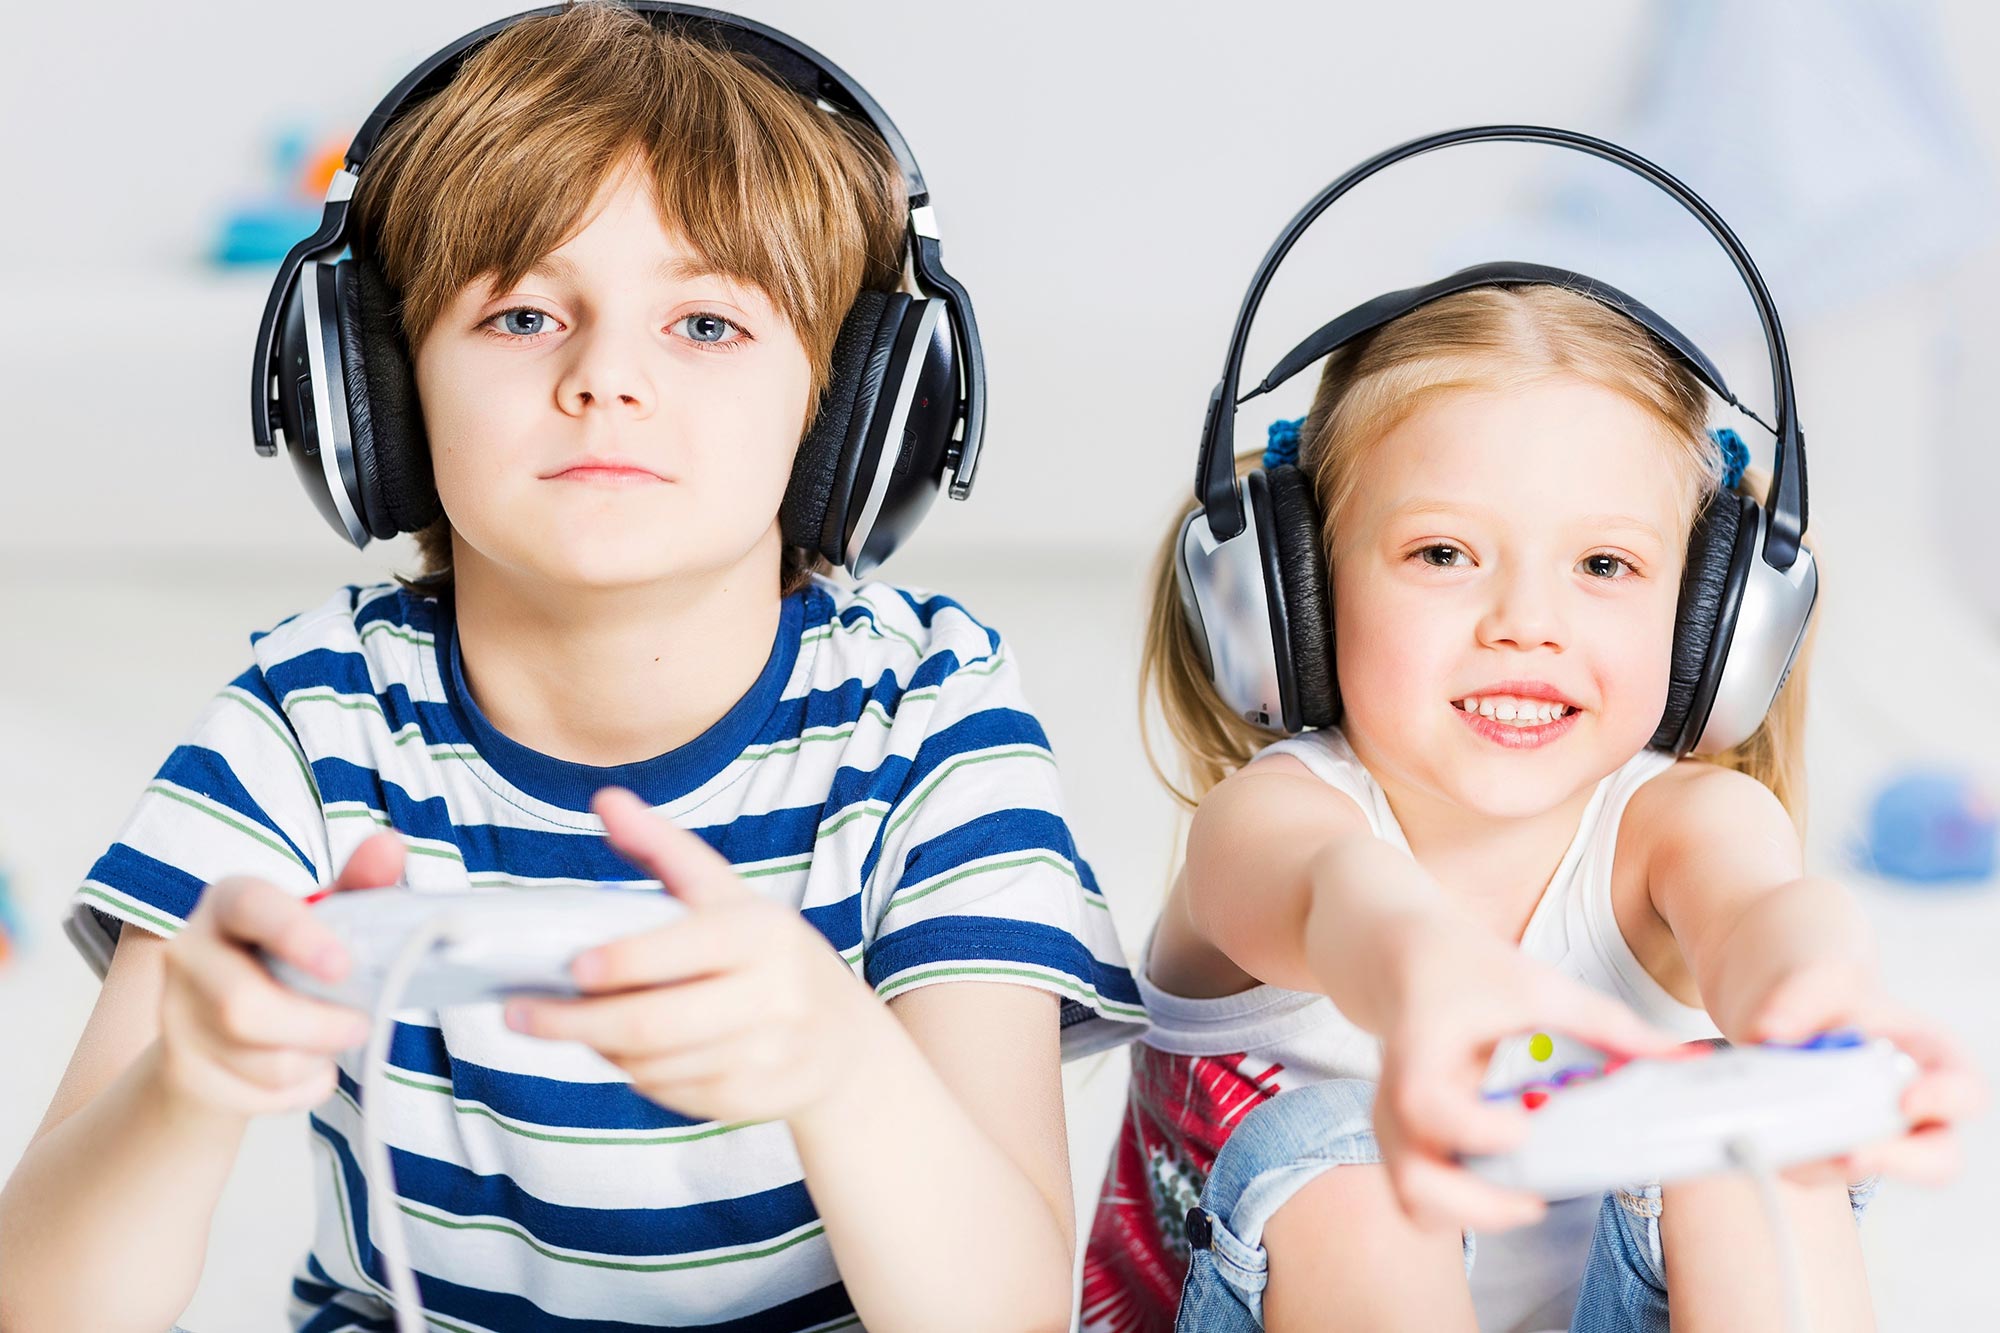 Top Video Games That Could Make You Smarter - Raise Smart Kid